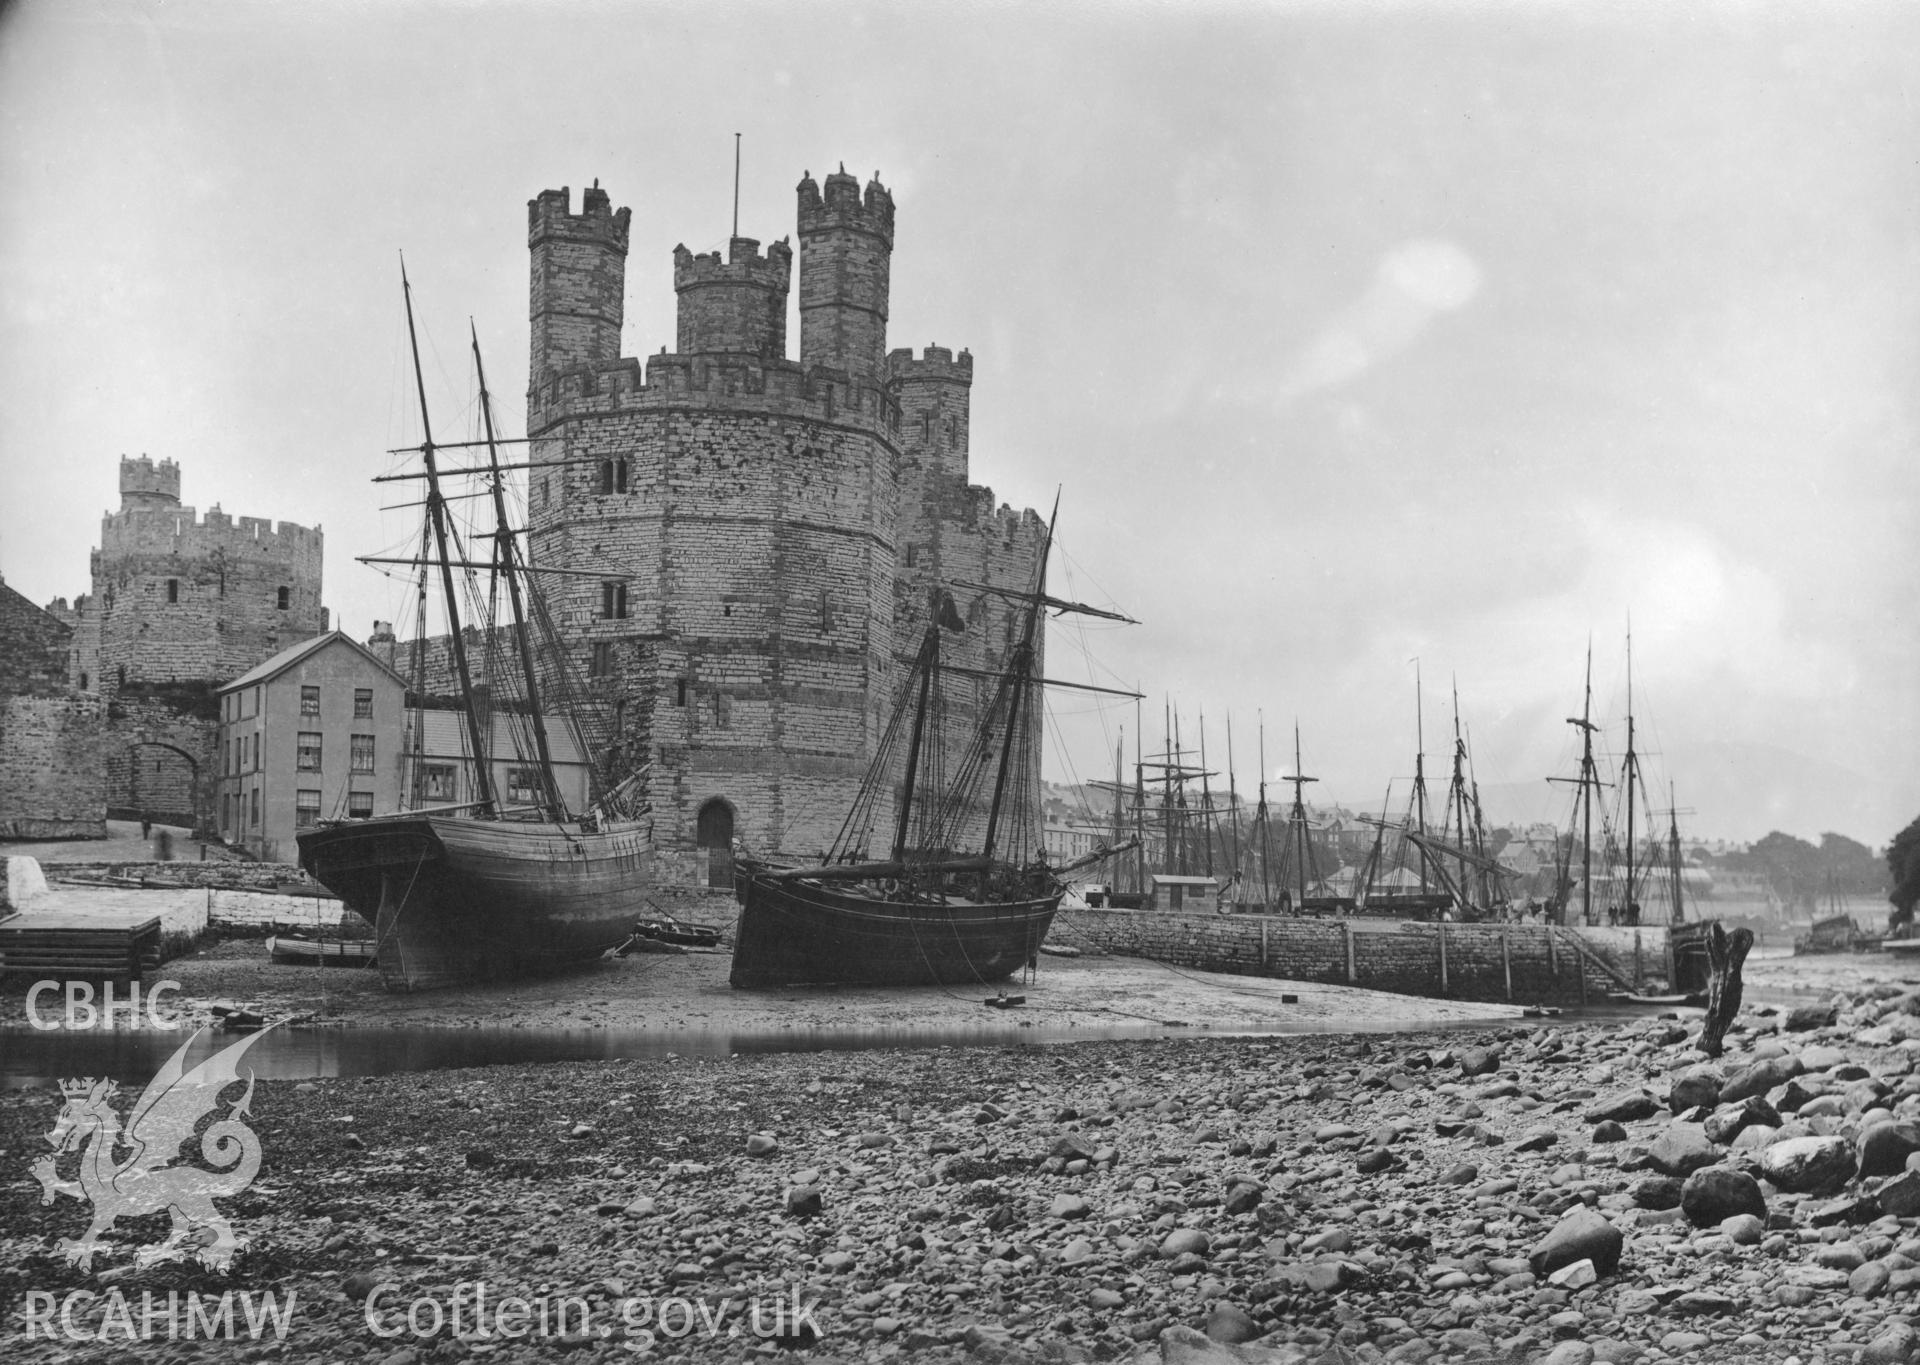 Caernarfon Castle and Afon Seiont ferry from the western bank, showing coastal trading vessel awaiting the tide.